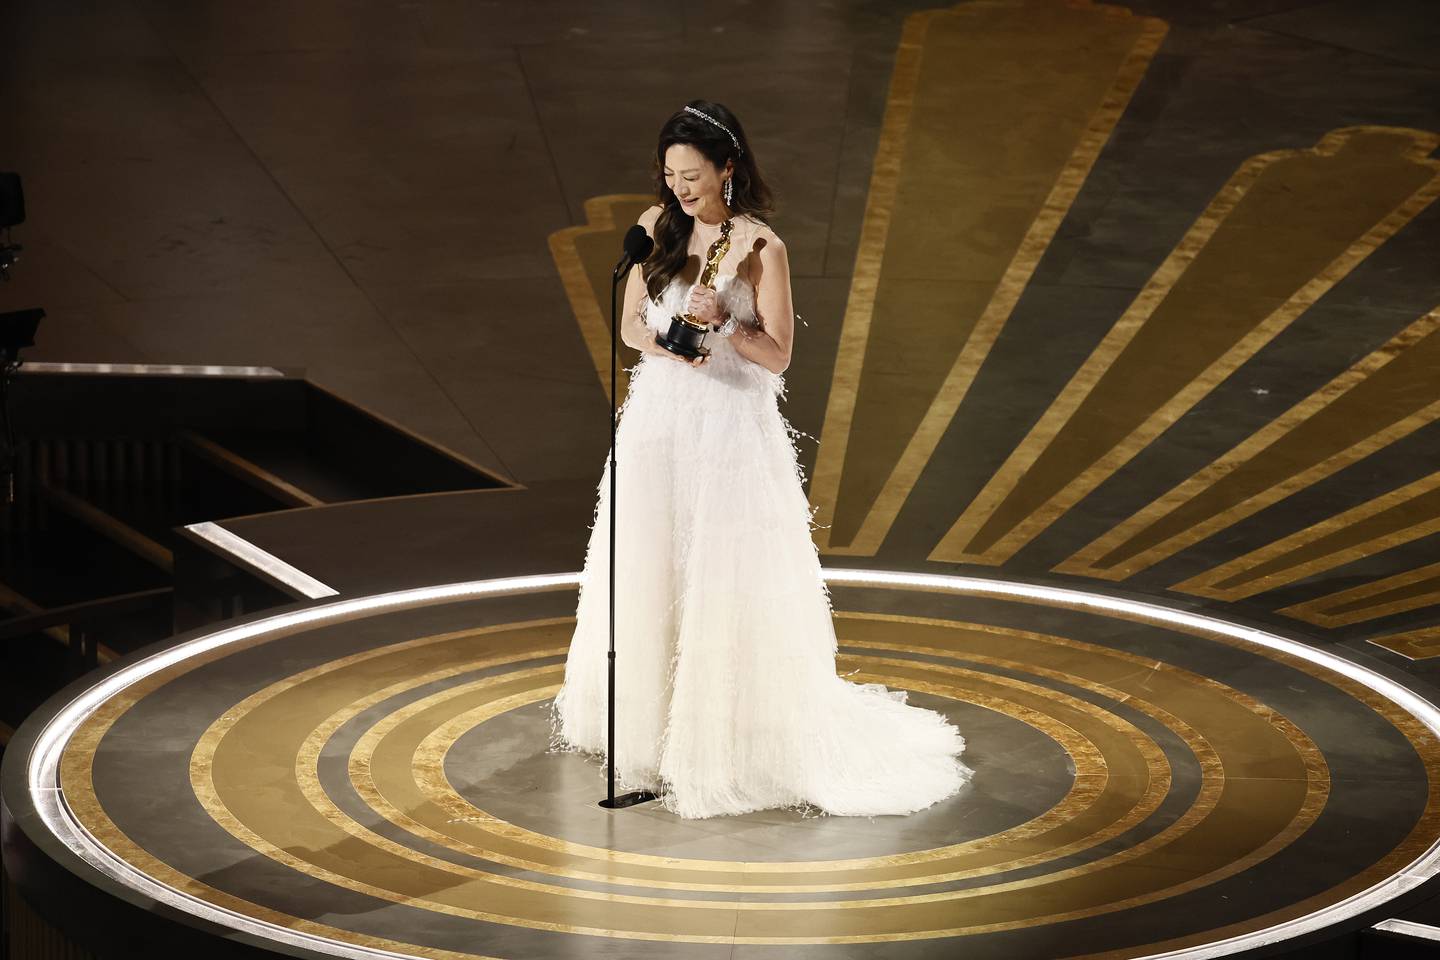 Michelle Yeoh after winning the Oscar for Best Actress for 'Everything Everywhere All at Once' during the 95th annual Academy Awards ceremony at the Dolby Theatre in Hollywood, Los Angeles, California, USA, 12 March 2023.  The Oscars are presented for outstanding individual or collective efforts in filmmaking in 24 categories.   EPA / ETIENNE LAURENT